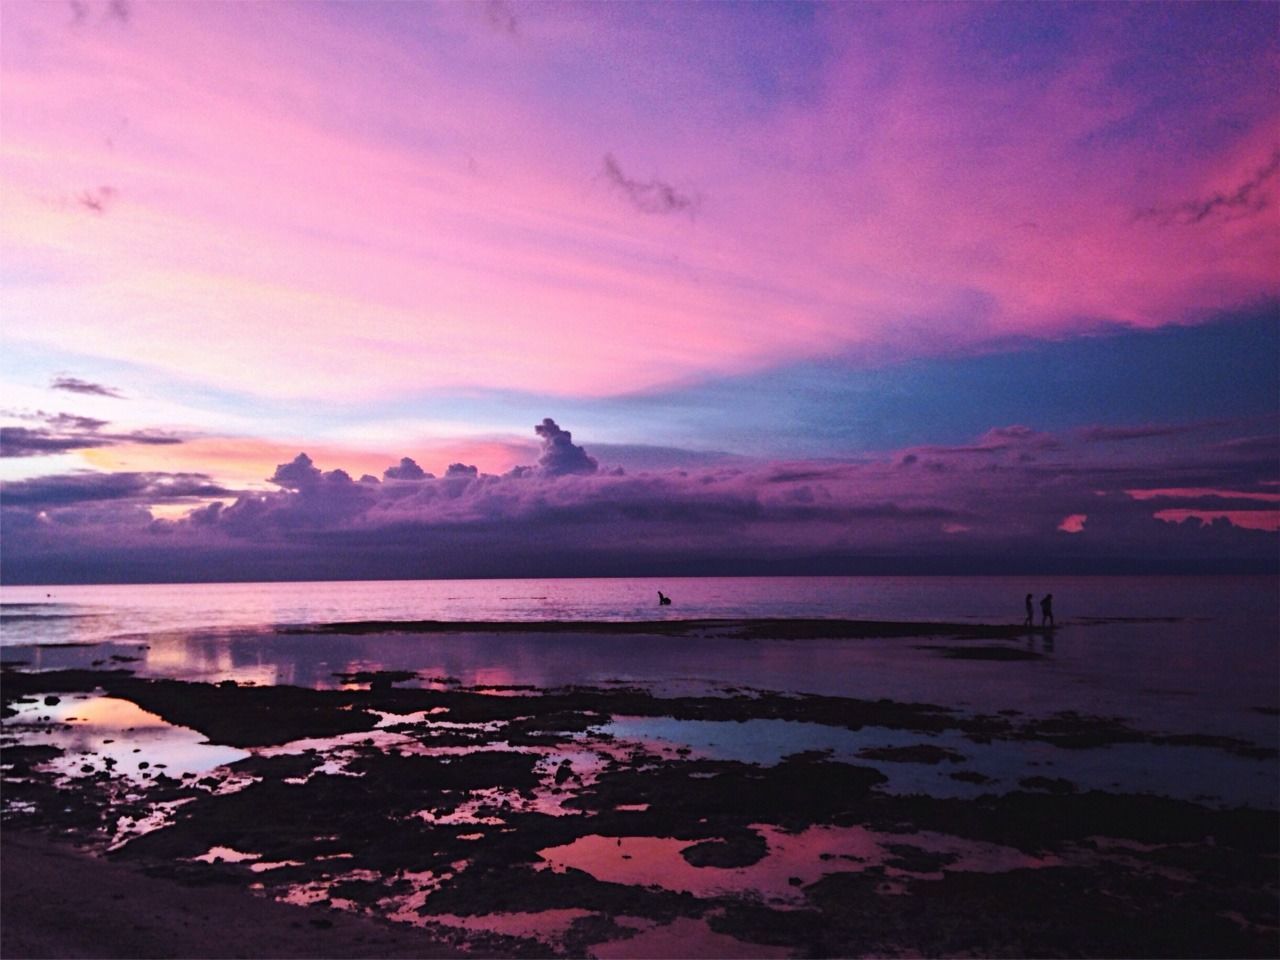 sky, water, cloud - sky, beauty in nature, sunset, scenics - nature, tranquility, tranquil scene, sea, nature, reflection, dusk, no people, beach, outdoors, pink color, idyllic, silhouette, purple, romantic sky